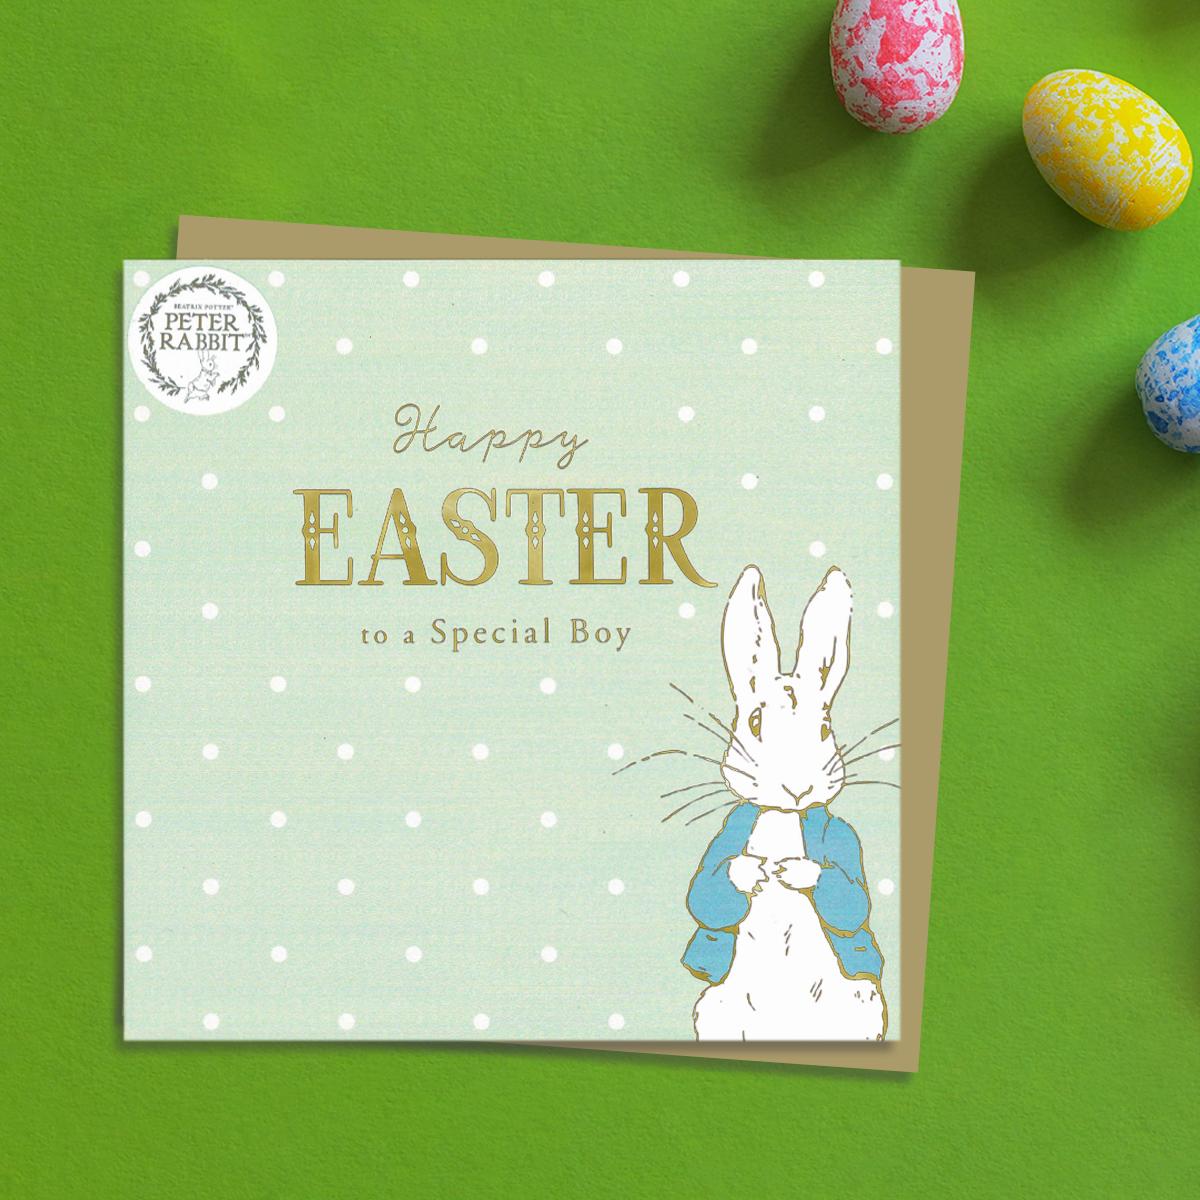 ' Happy Easter To A Special Boy' From Beatrix Potter Showing Peter Rabbit. Complete With Brown Envelope